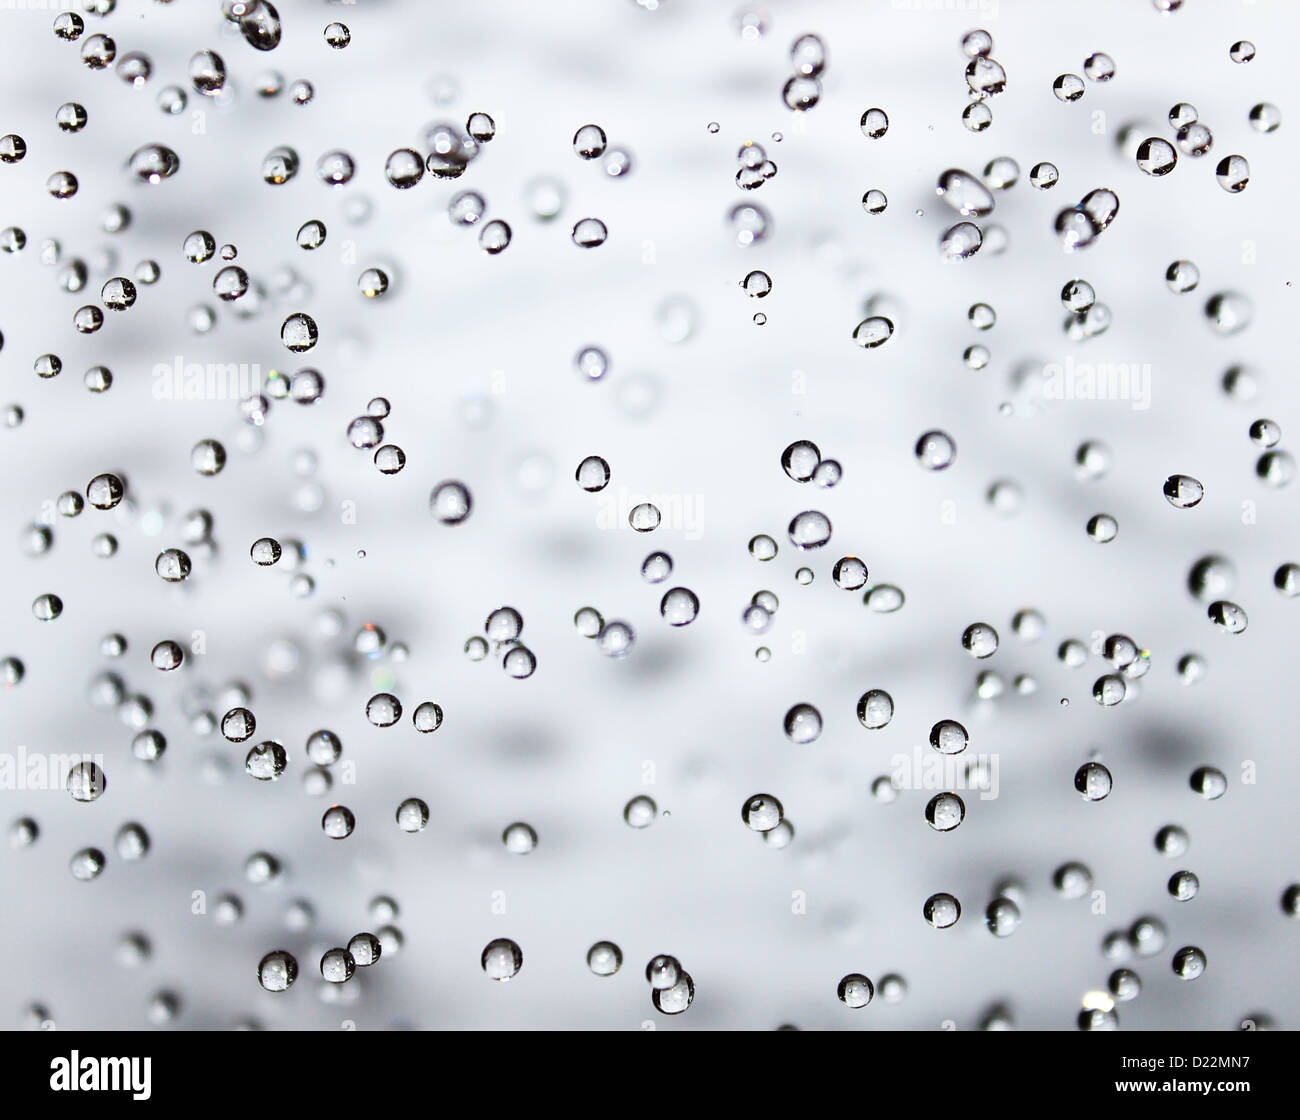 Lot of flying water drops Stock Photo